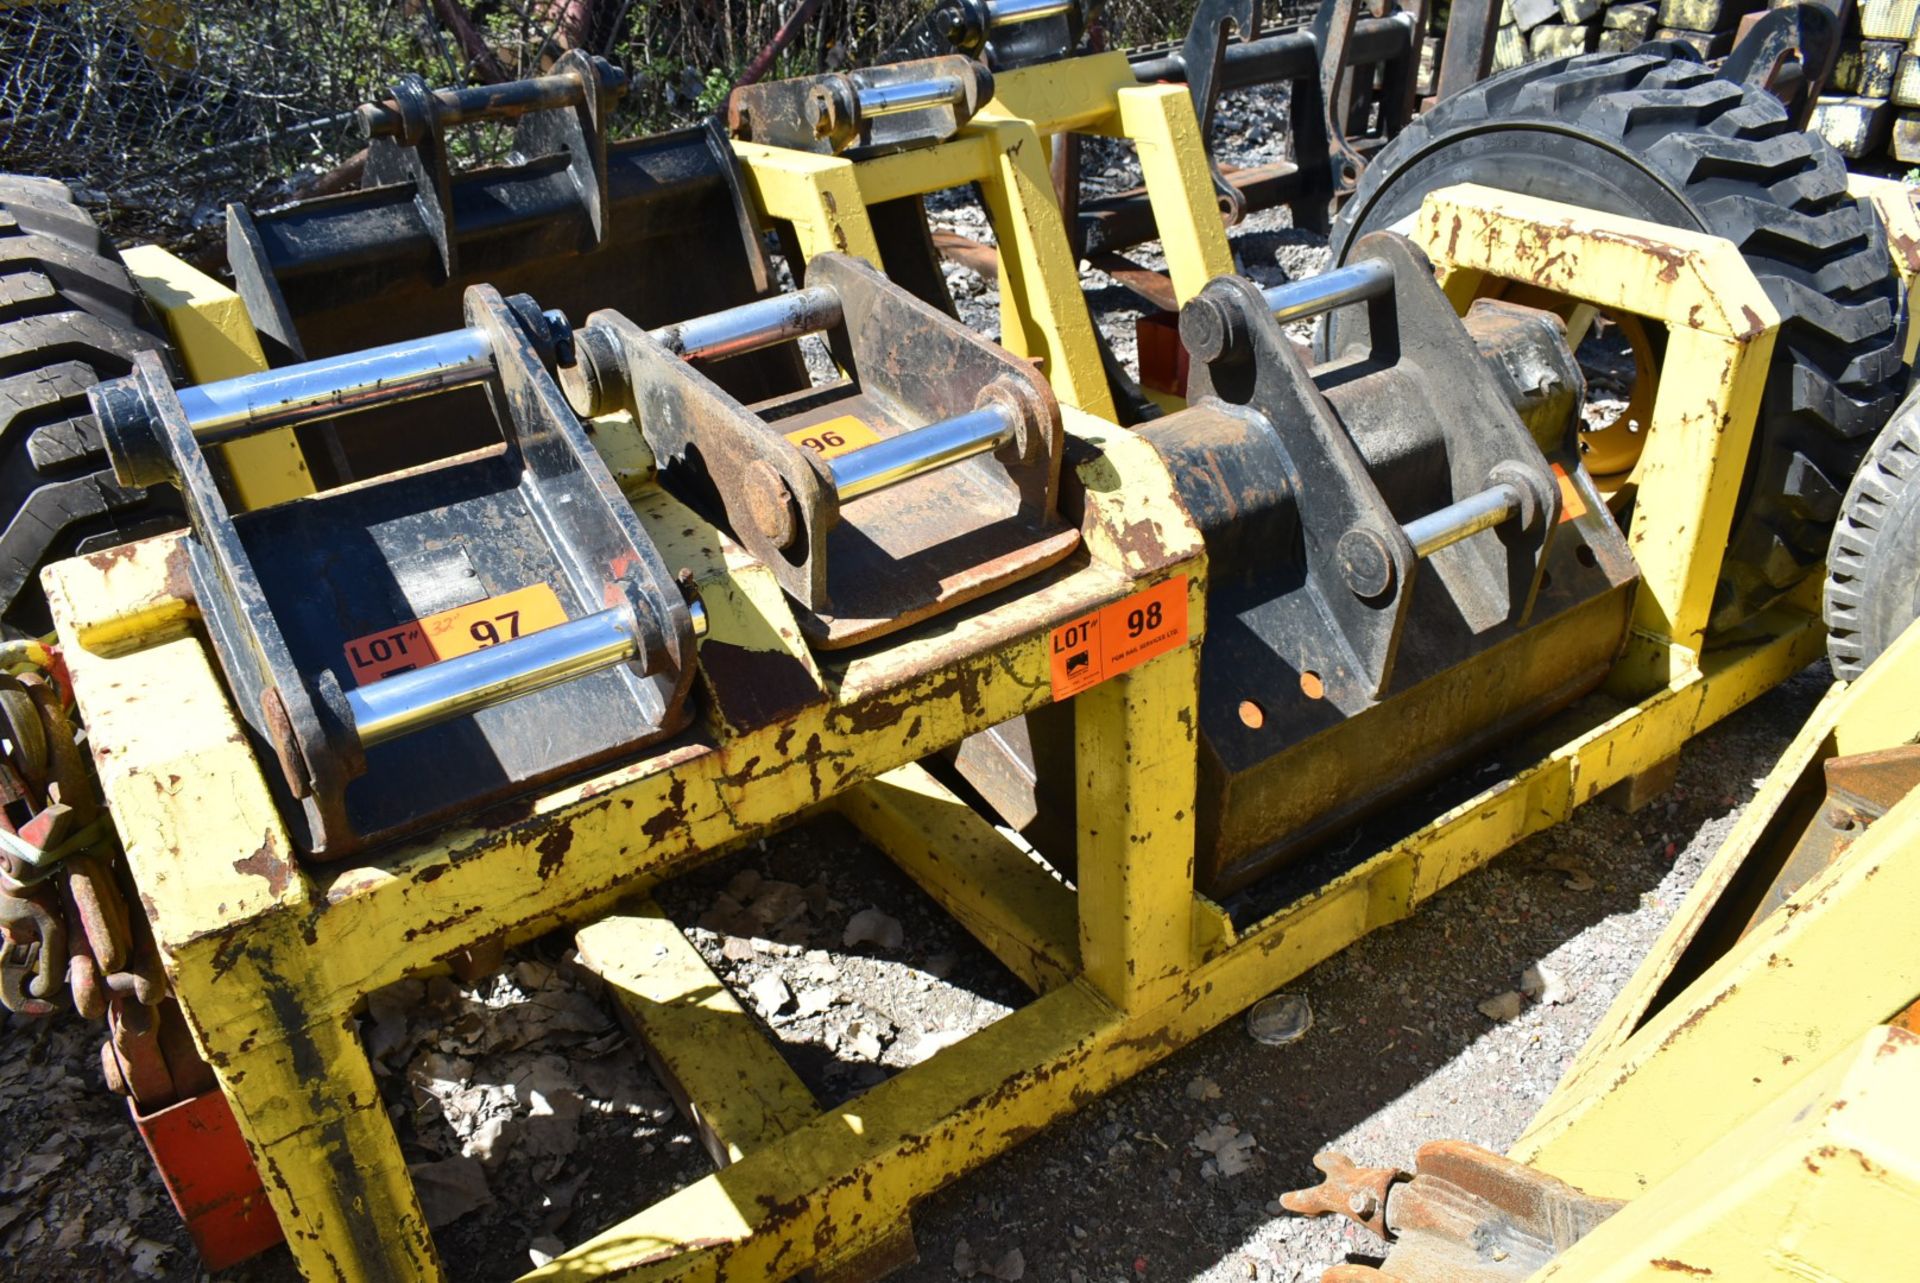 LOT/ TOOL CARRIER CRADLE WITH TIRE